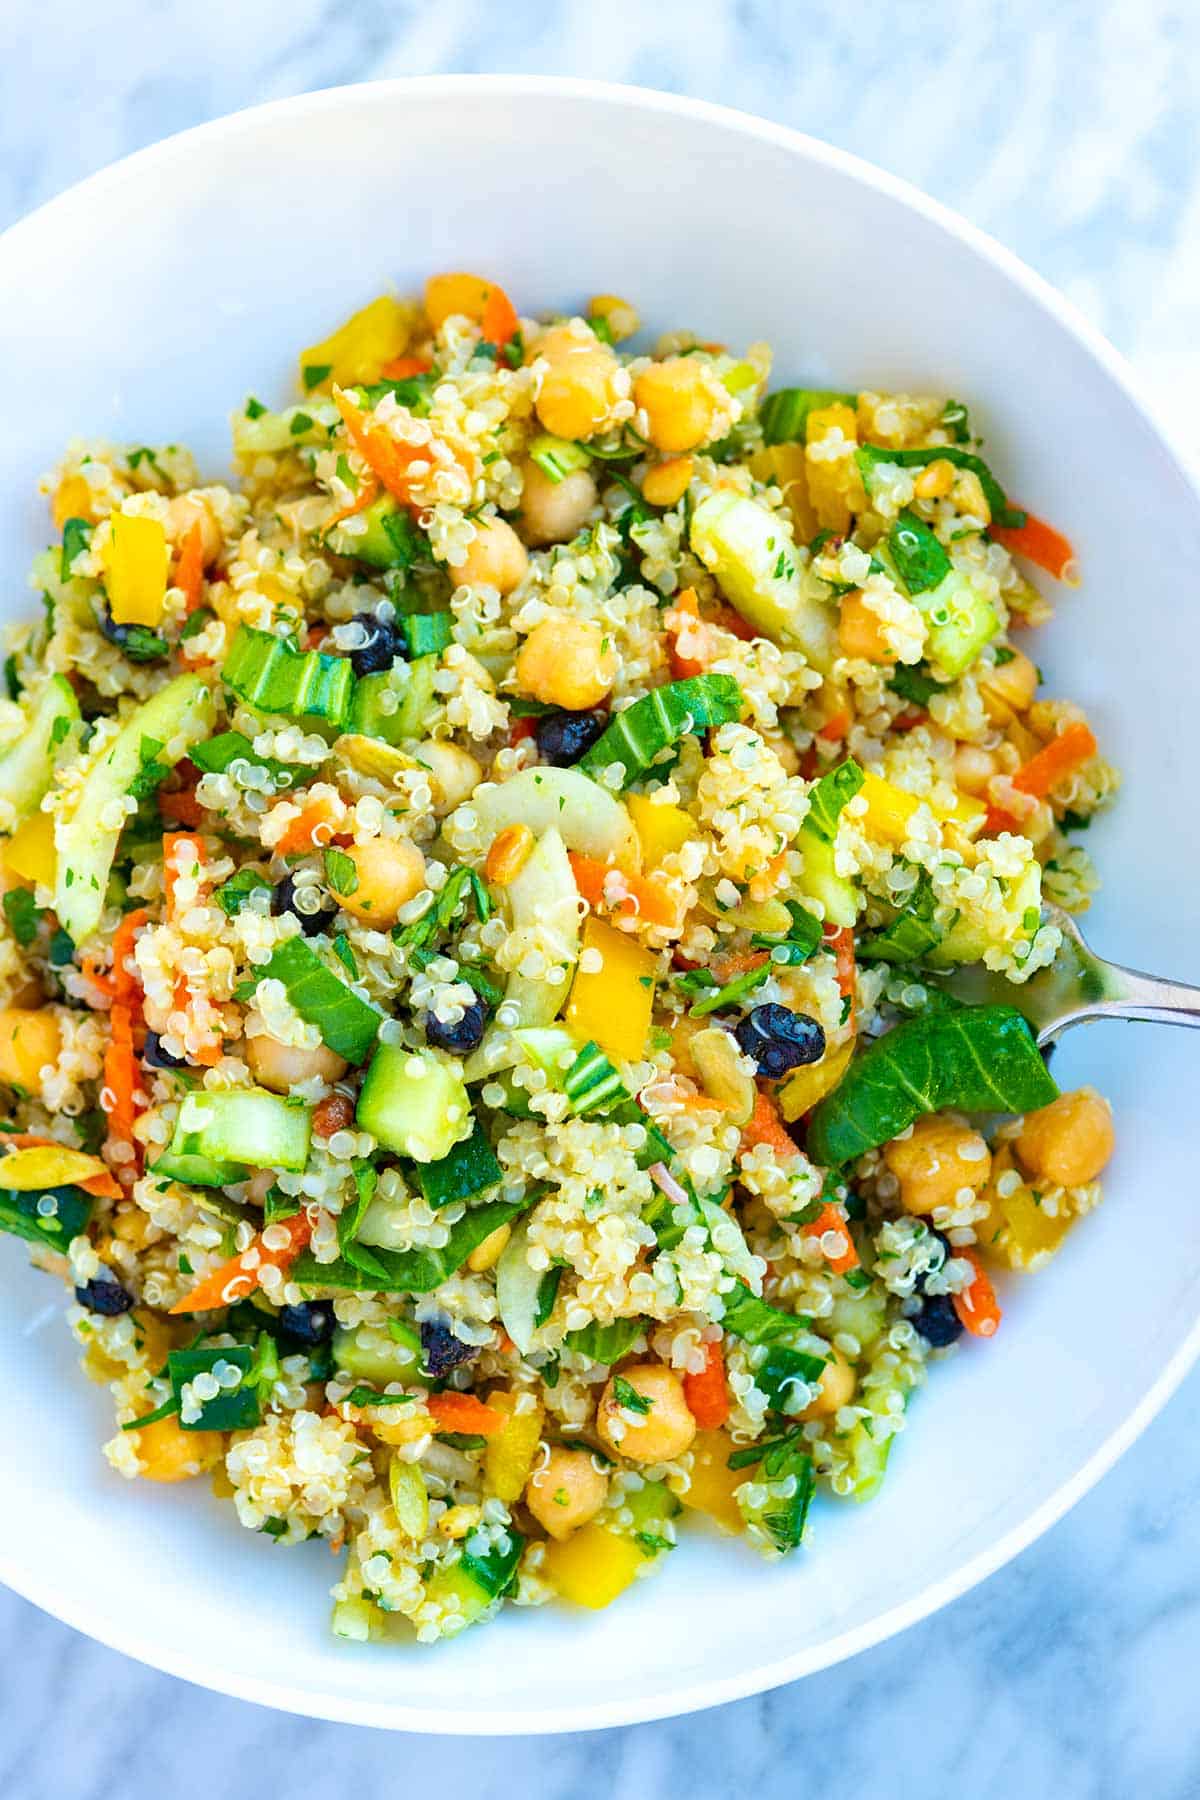 Healthy quinoa salad with veggies, dried fruits, and chickpeas